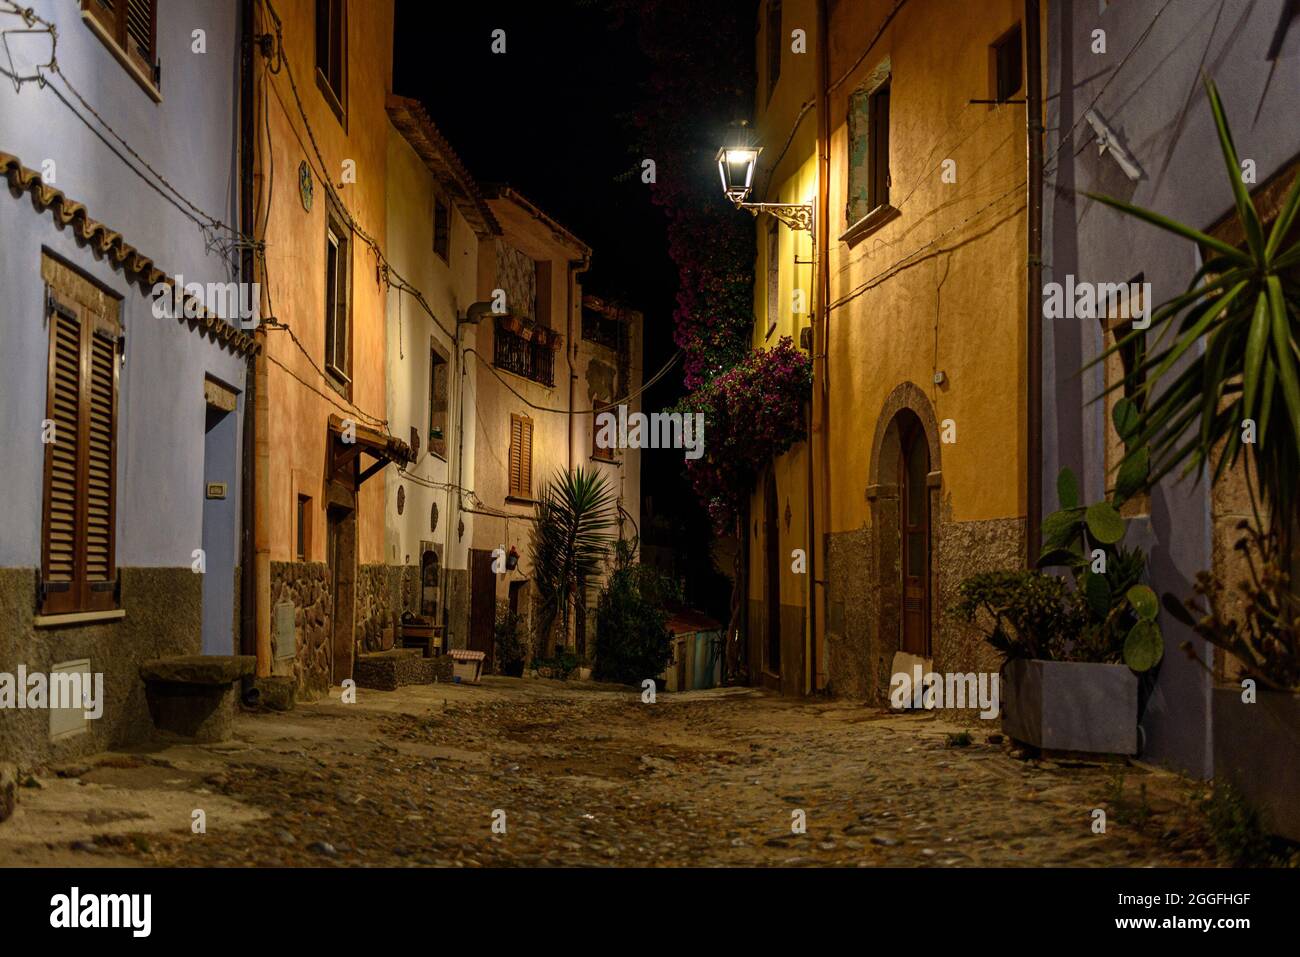 The narrow cobblestone streets of old town Bosa at night Stock Photo